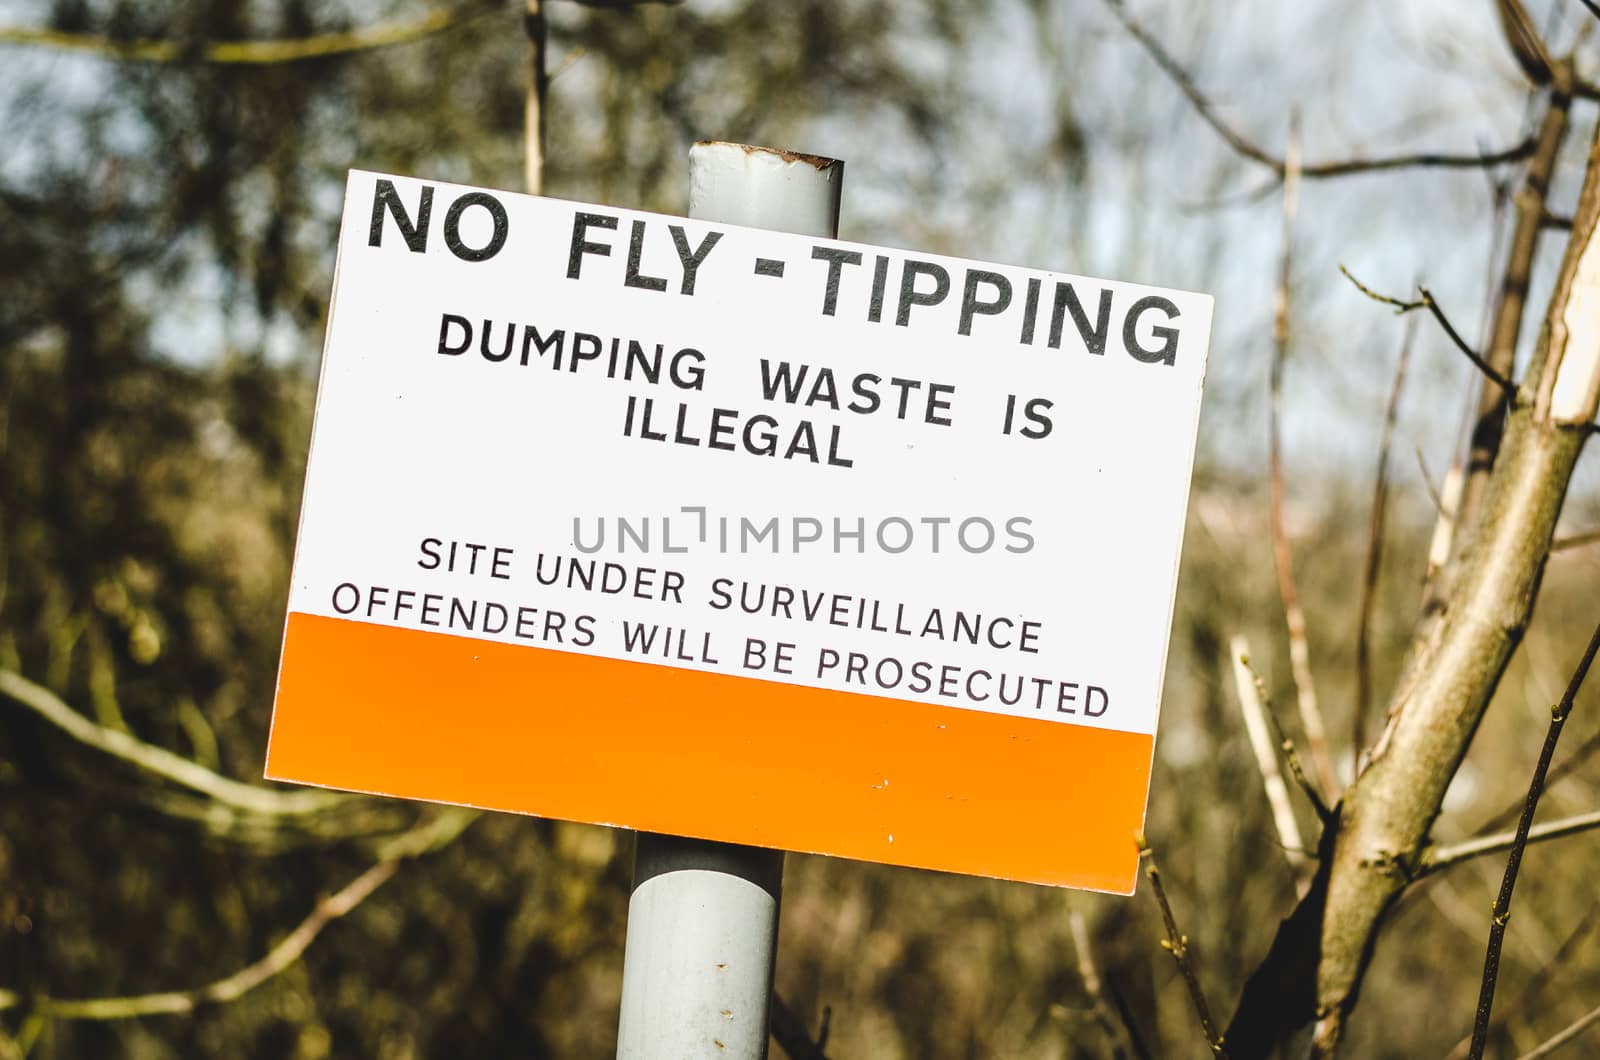 A sign in England, UK warning that dumping of trash in the area is illegal and offenders will be prosecuted. Surveillance site.